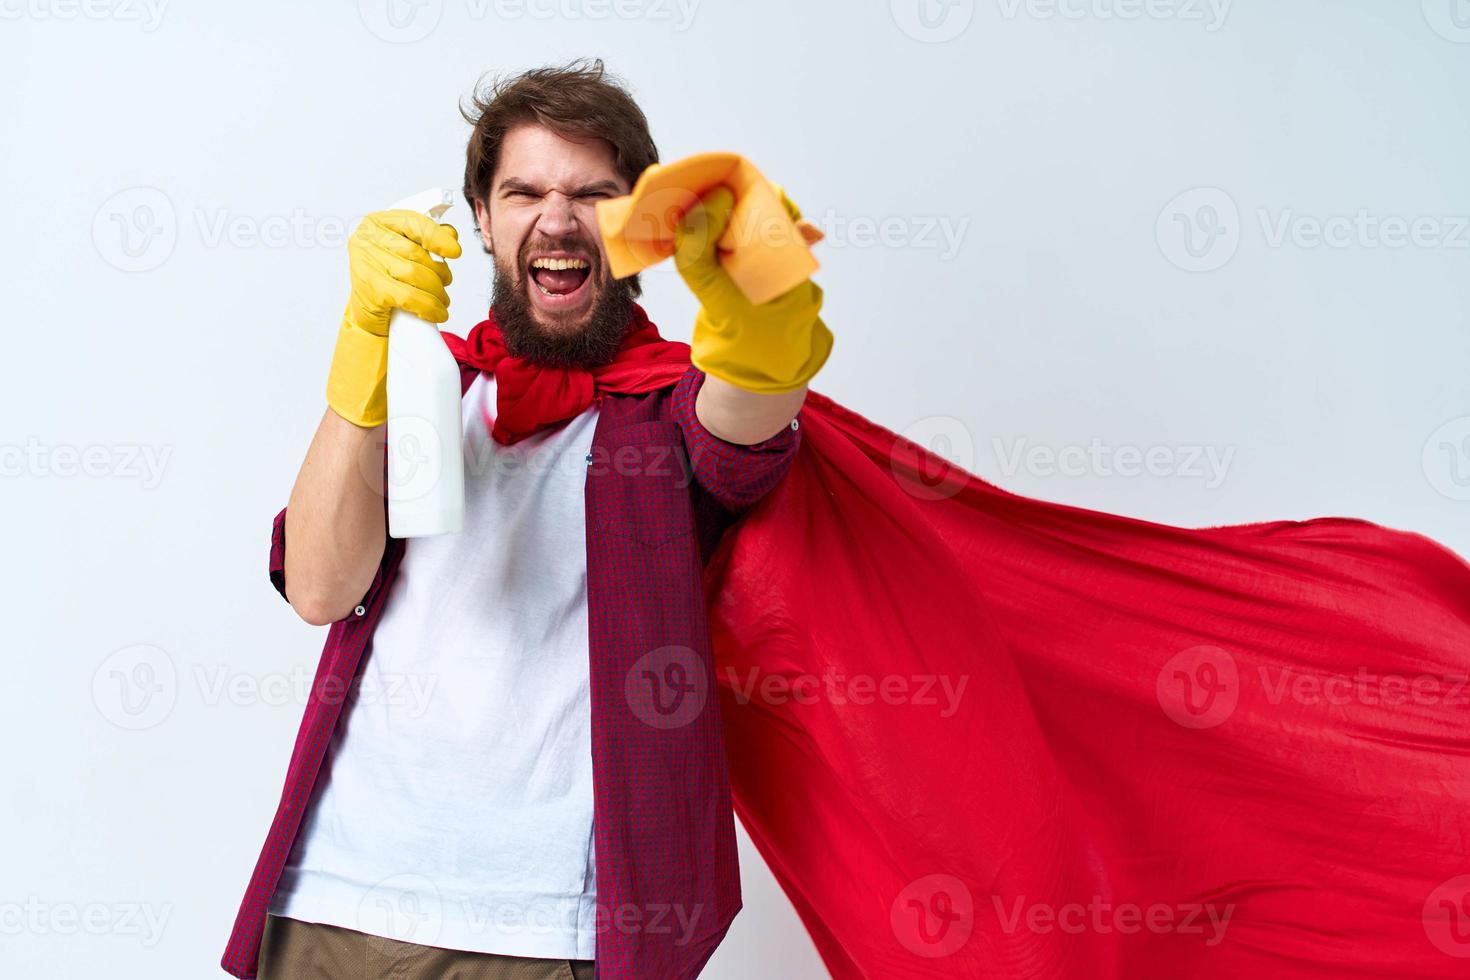 Emotional man in red raincoat detergent house cleaning service light background photo